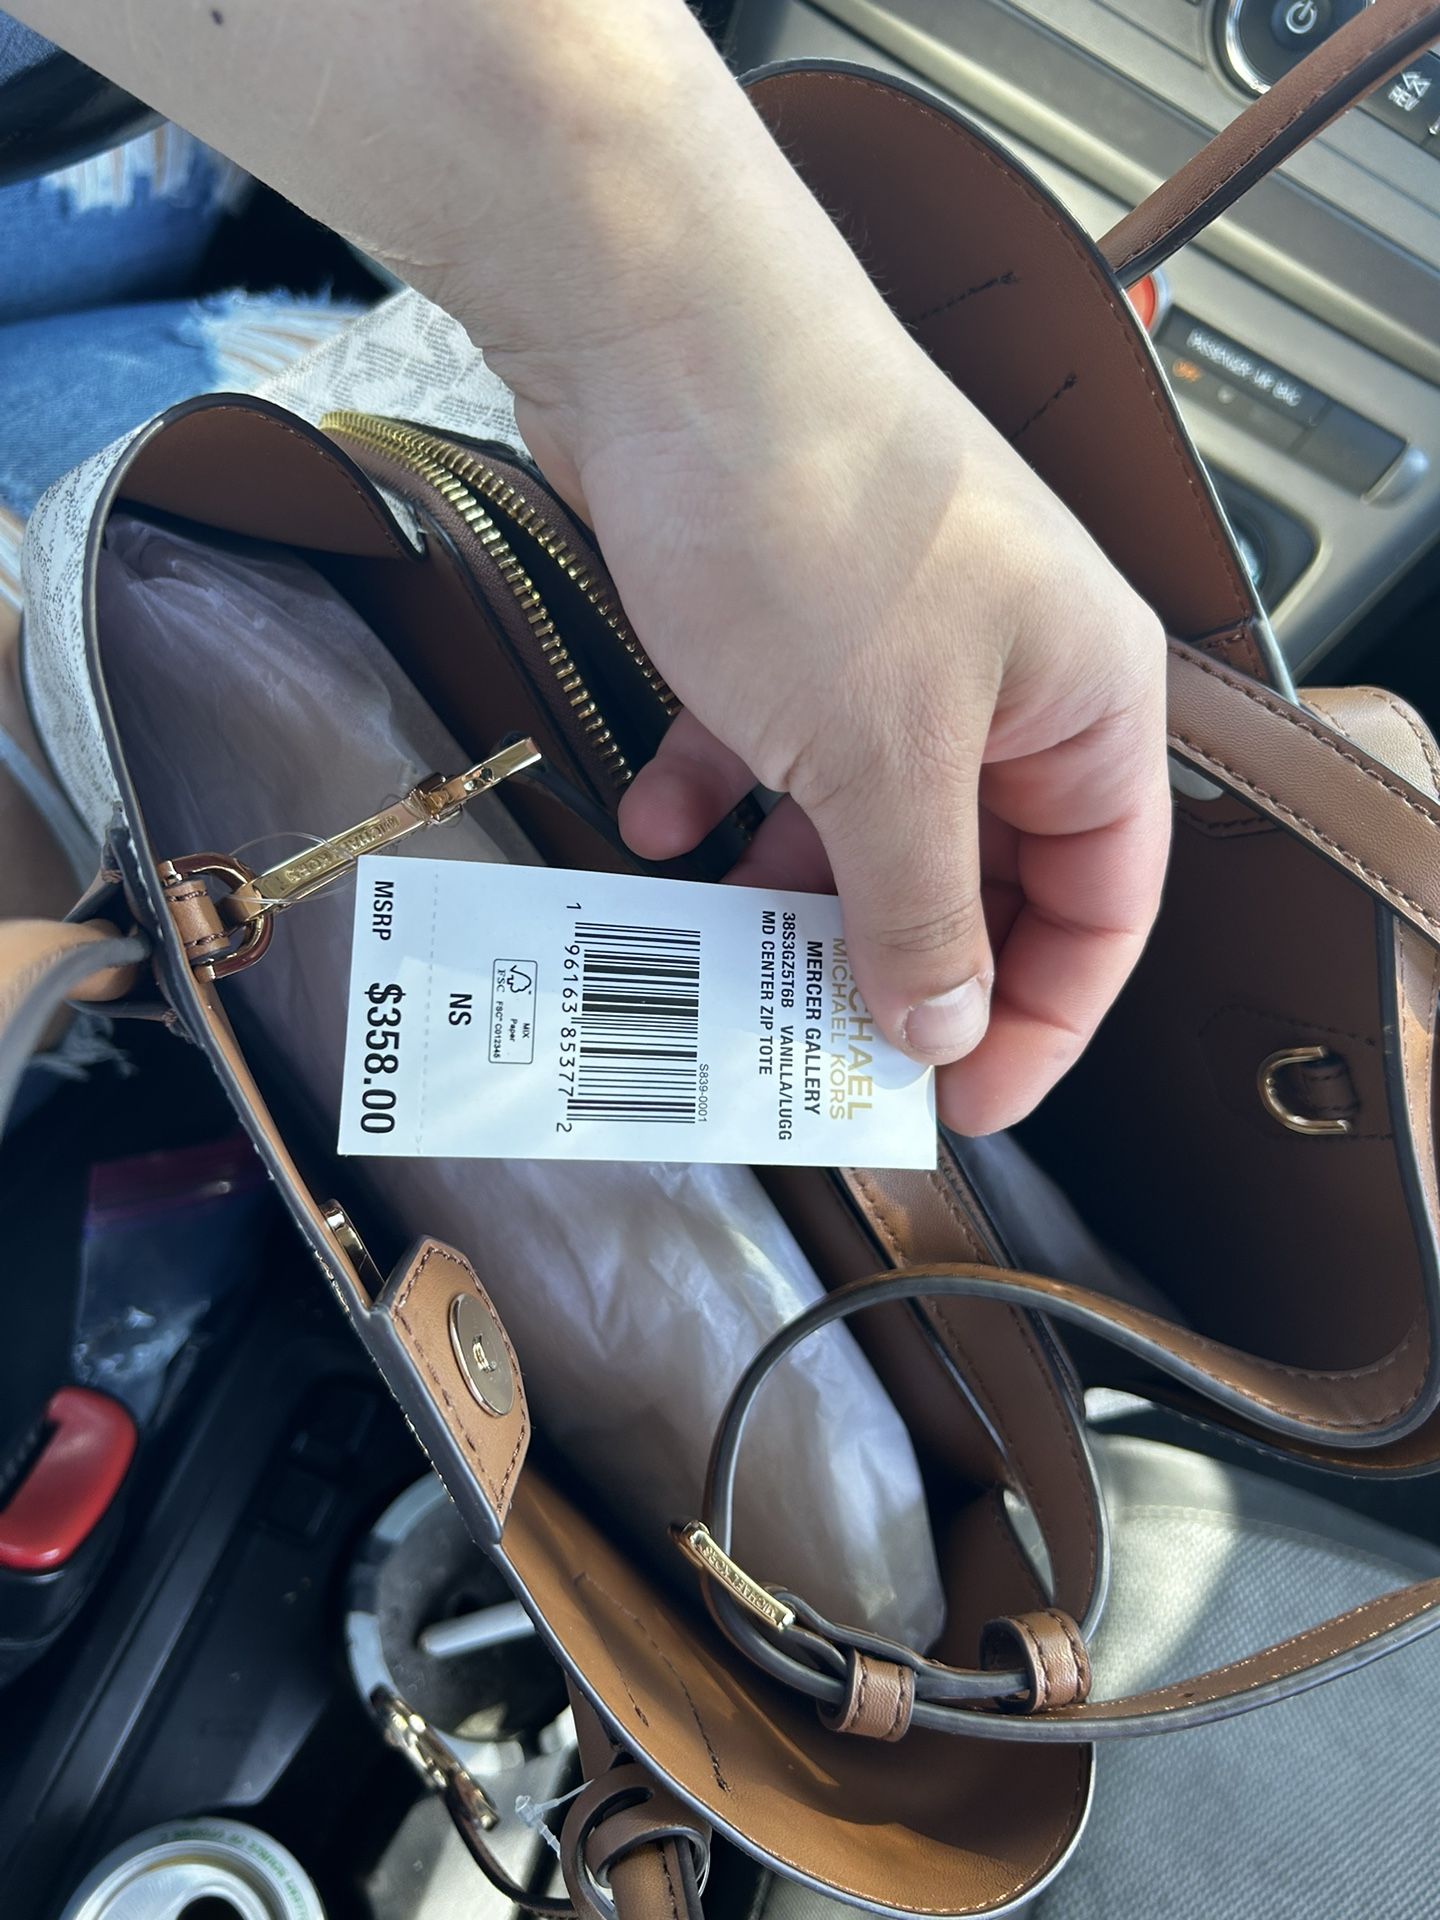 Rose Light Pink Michael Kors Purse for Sale in Hacienda Heights, CA -  OfferUp